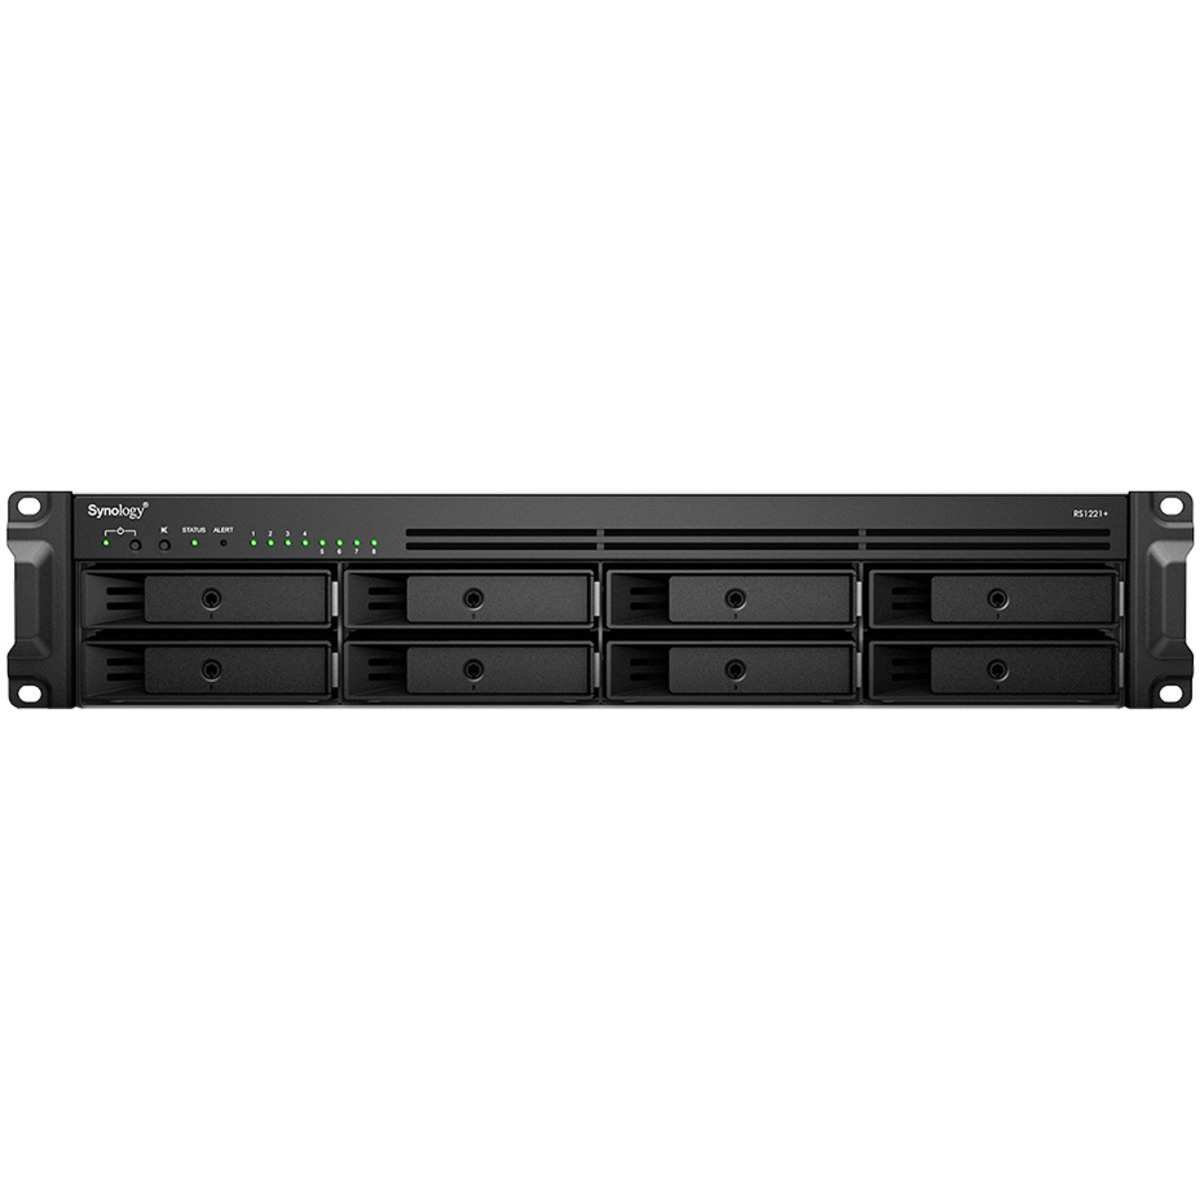 Synology RackStation RS1221RP+ 12tb 8-Bay RackMount Multimedia / Power User / Business NAS - Network Attached Storage Device 6x2tb Samsung 870 EVO MZ-77E2T0BAM 2.5 560/530MB/s SATA 6Gb/s SSD CONSUMER Class Drives Installed - Burn-In Tested - FREE RAM UPGRADE RackStation RS1221RP+